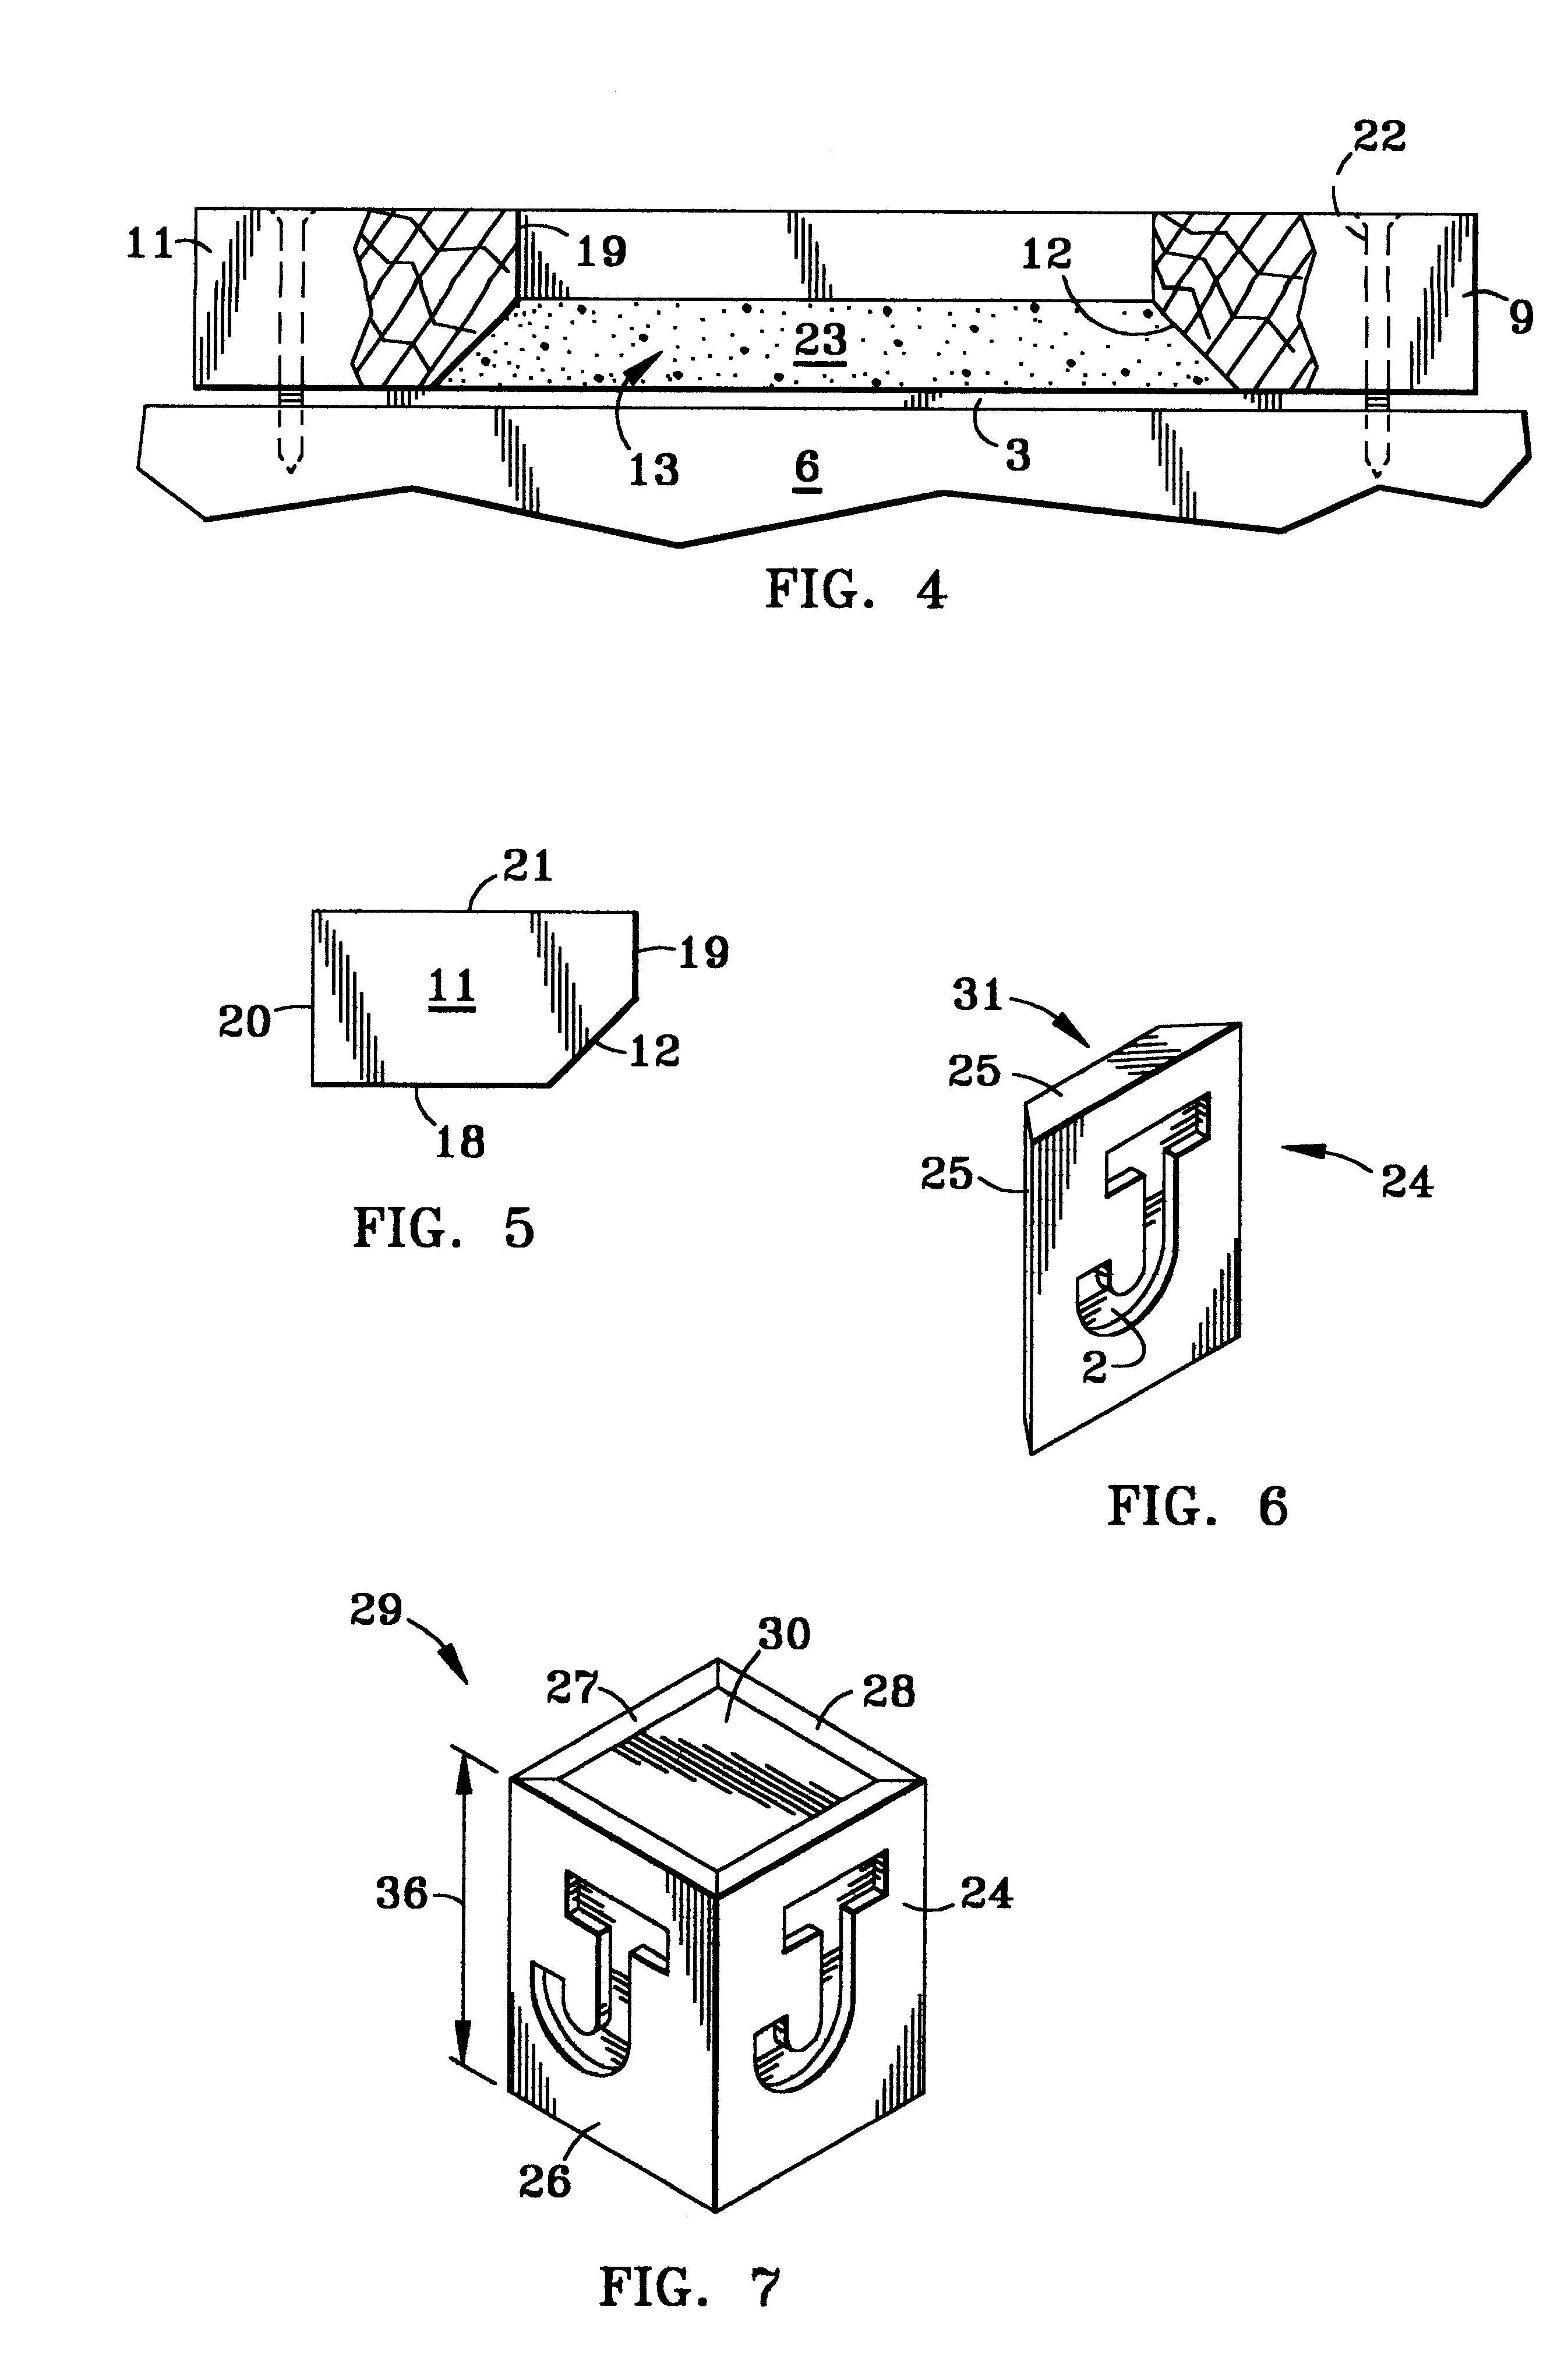 Method for producing candles having three dimensional surface designs